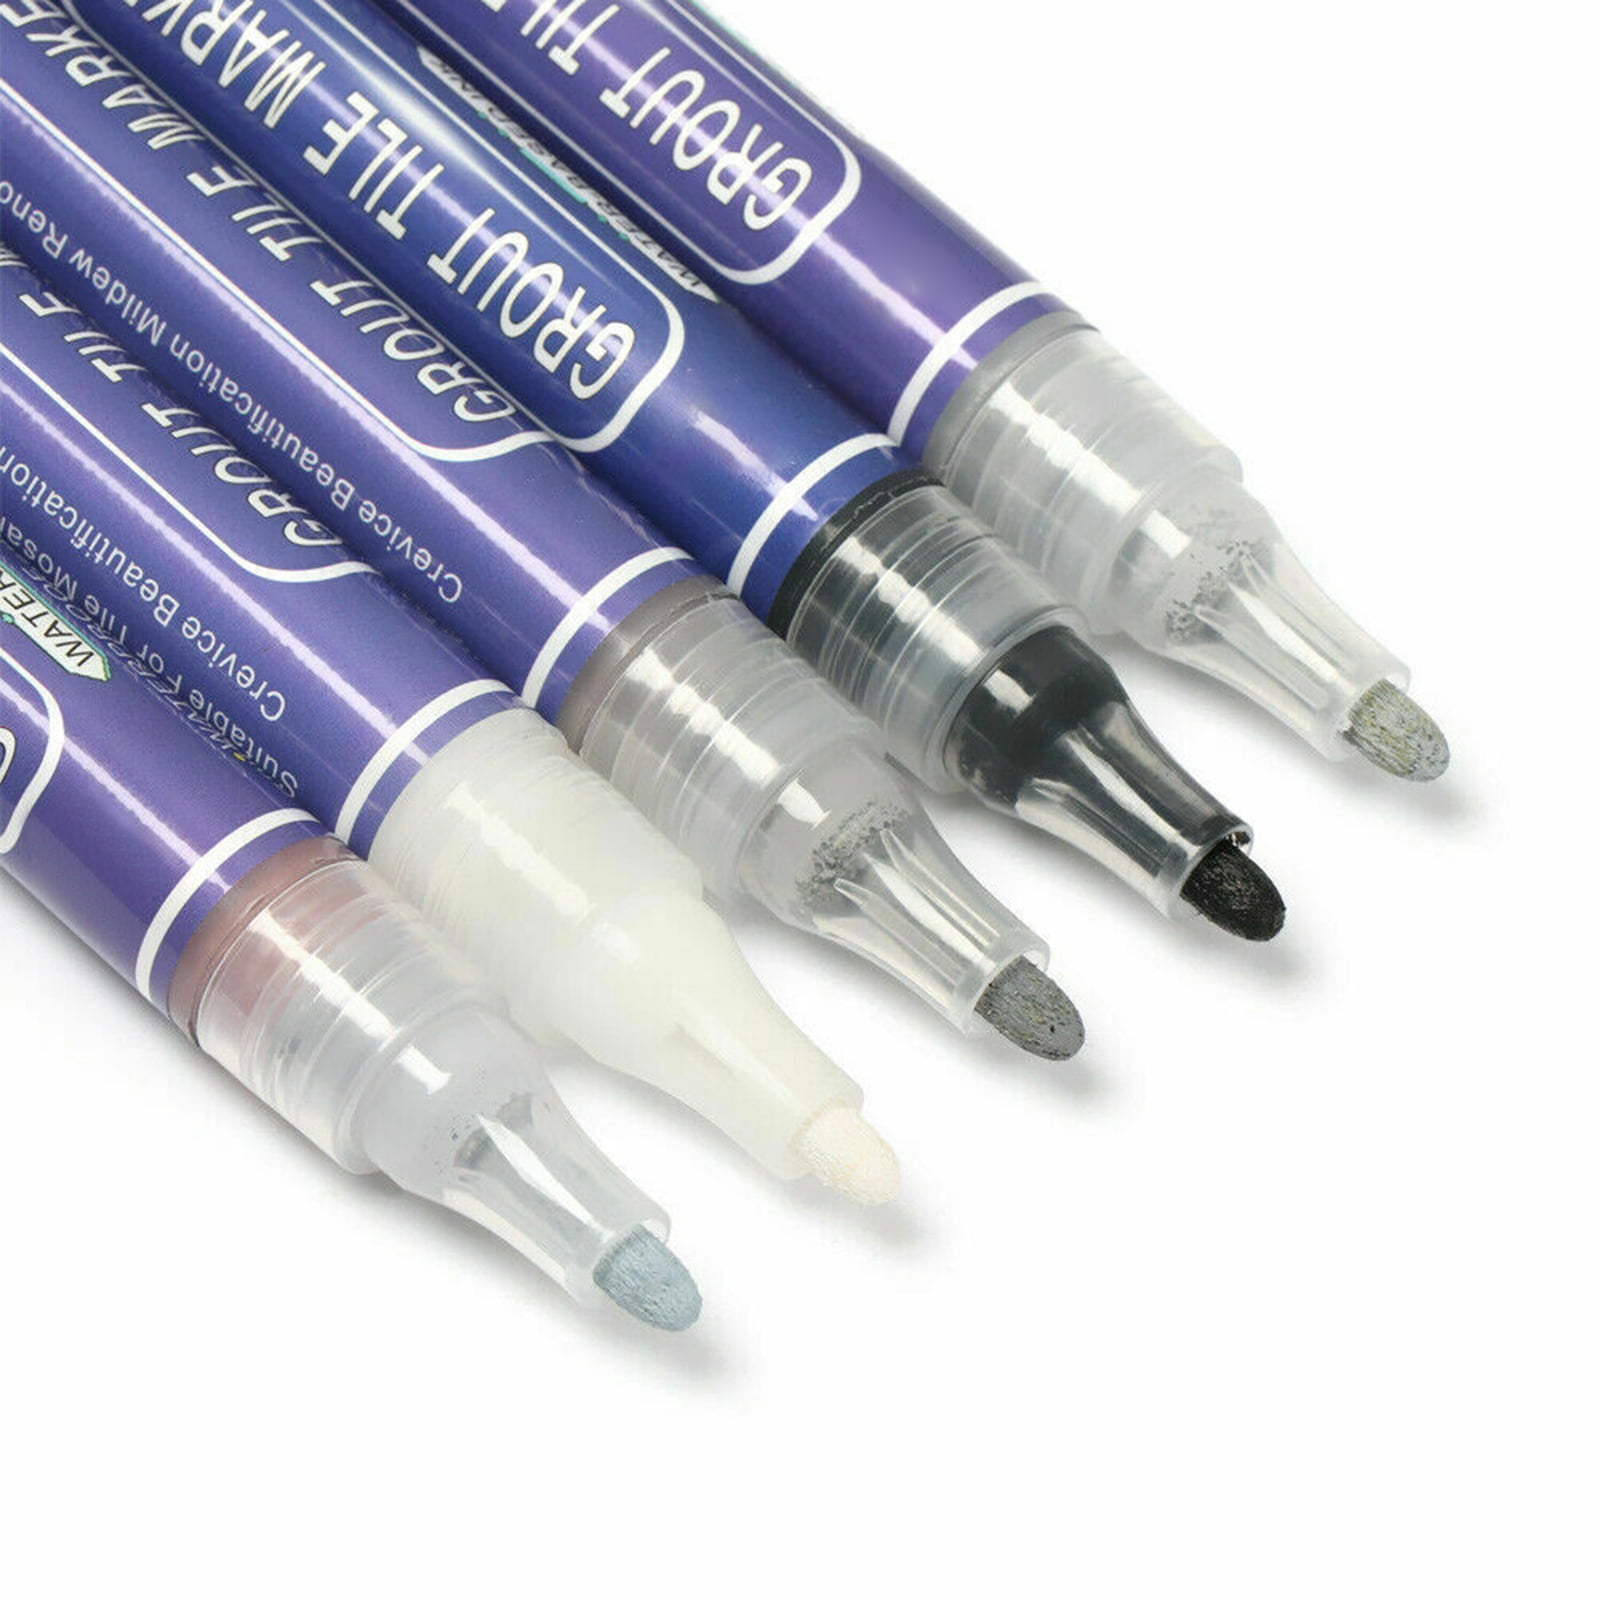 4Pcs Tile Grout Pen White Grout Renew Repair Marker with Replacement Nib  Tip to The Look of Tile Grout Lines Pen - AliExpress